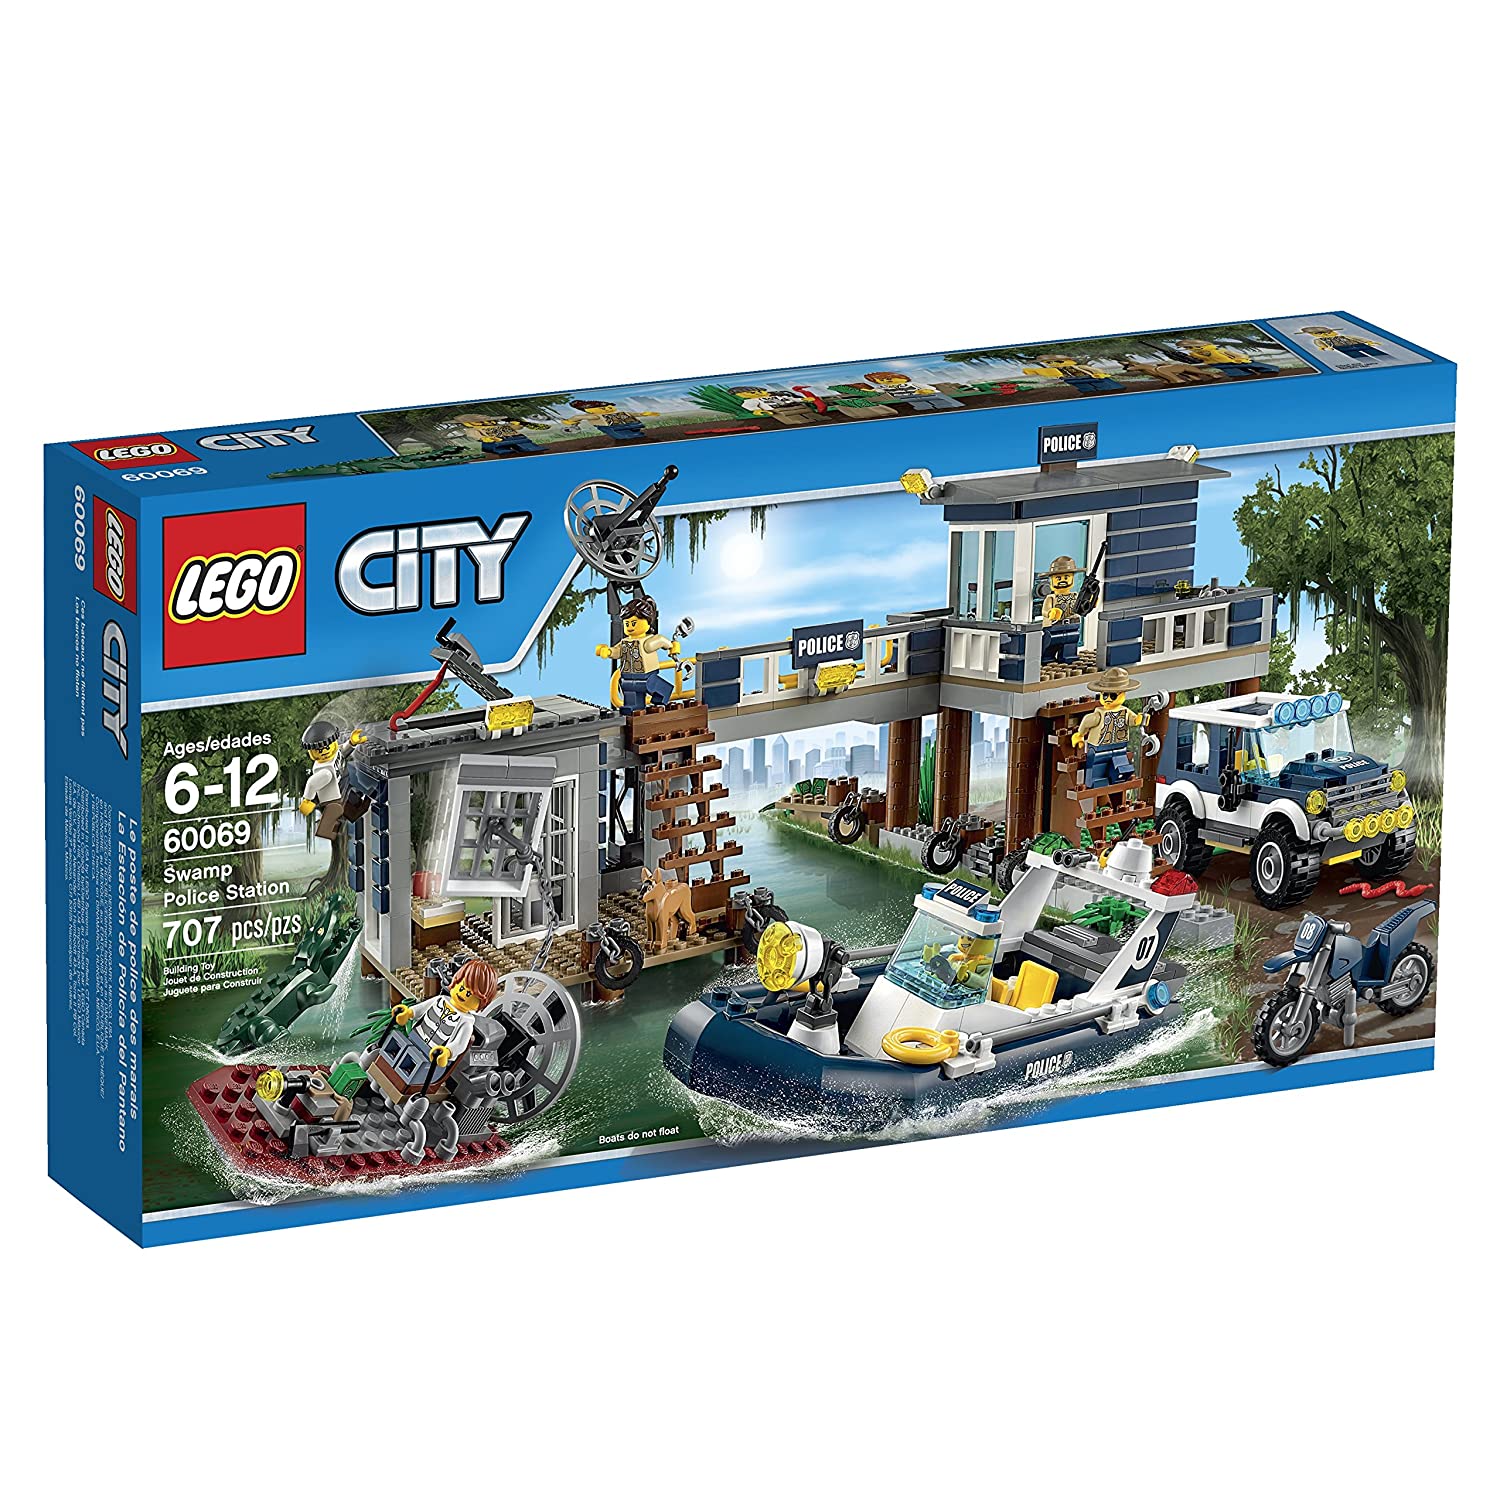 9 Best LEGO Police Station Set 2022 - Buying Guide & Reviews 5